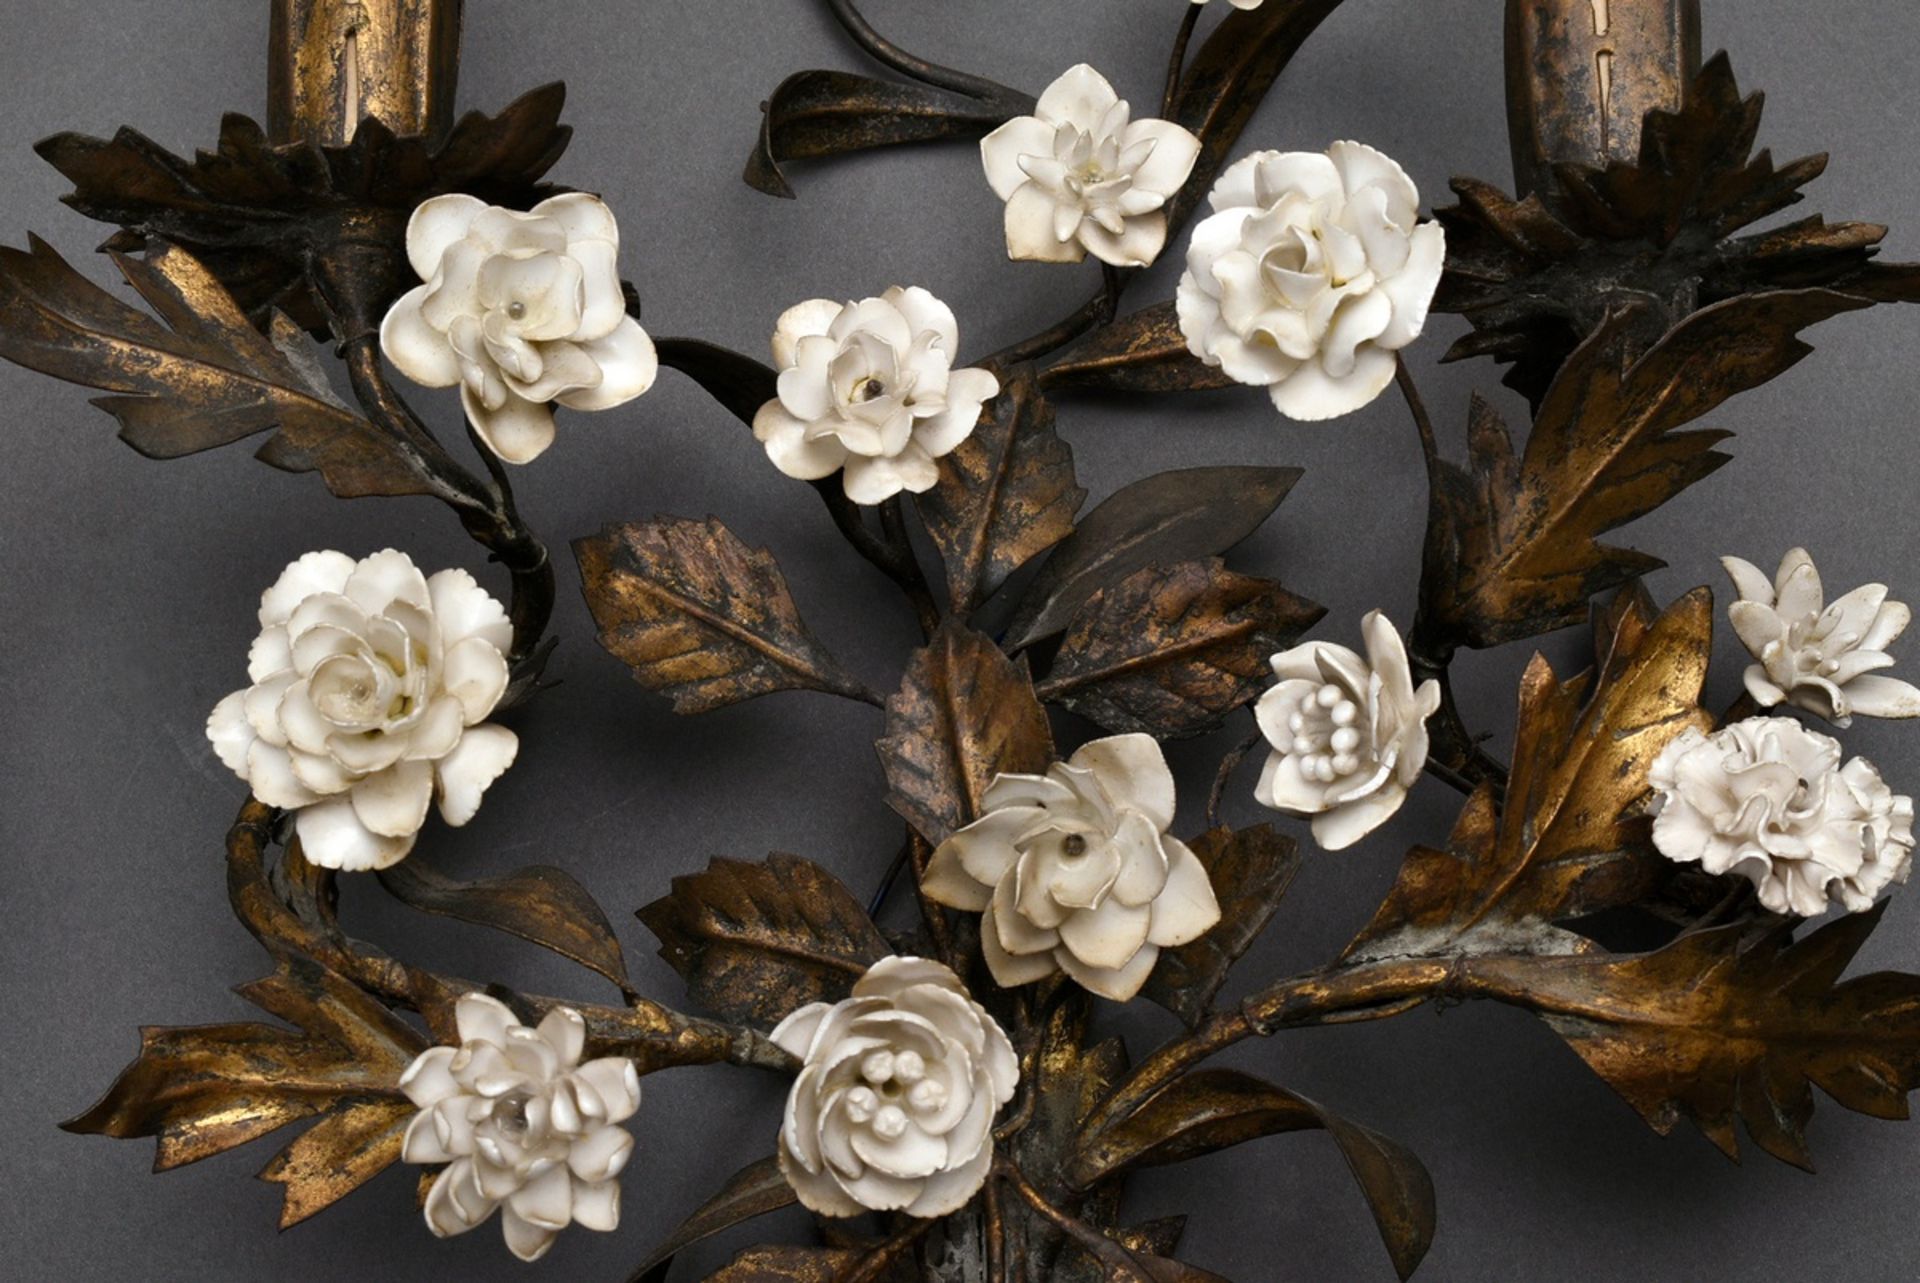 Pair of Italian wall arms in floral façon with porcelain blossoms, sheet brass with remnants of gil - Image 3 of 6